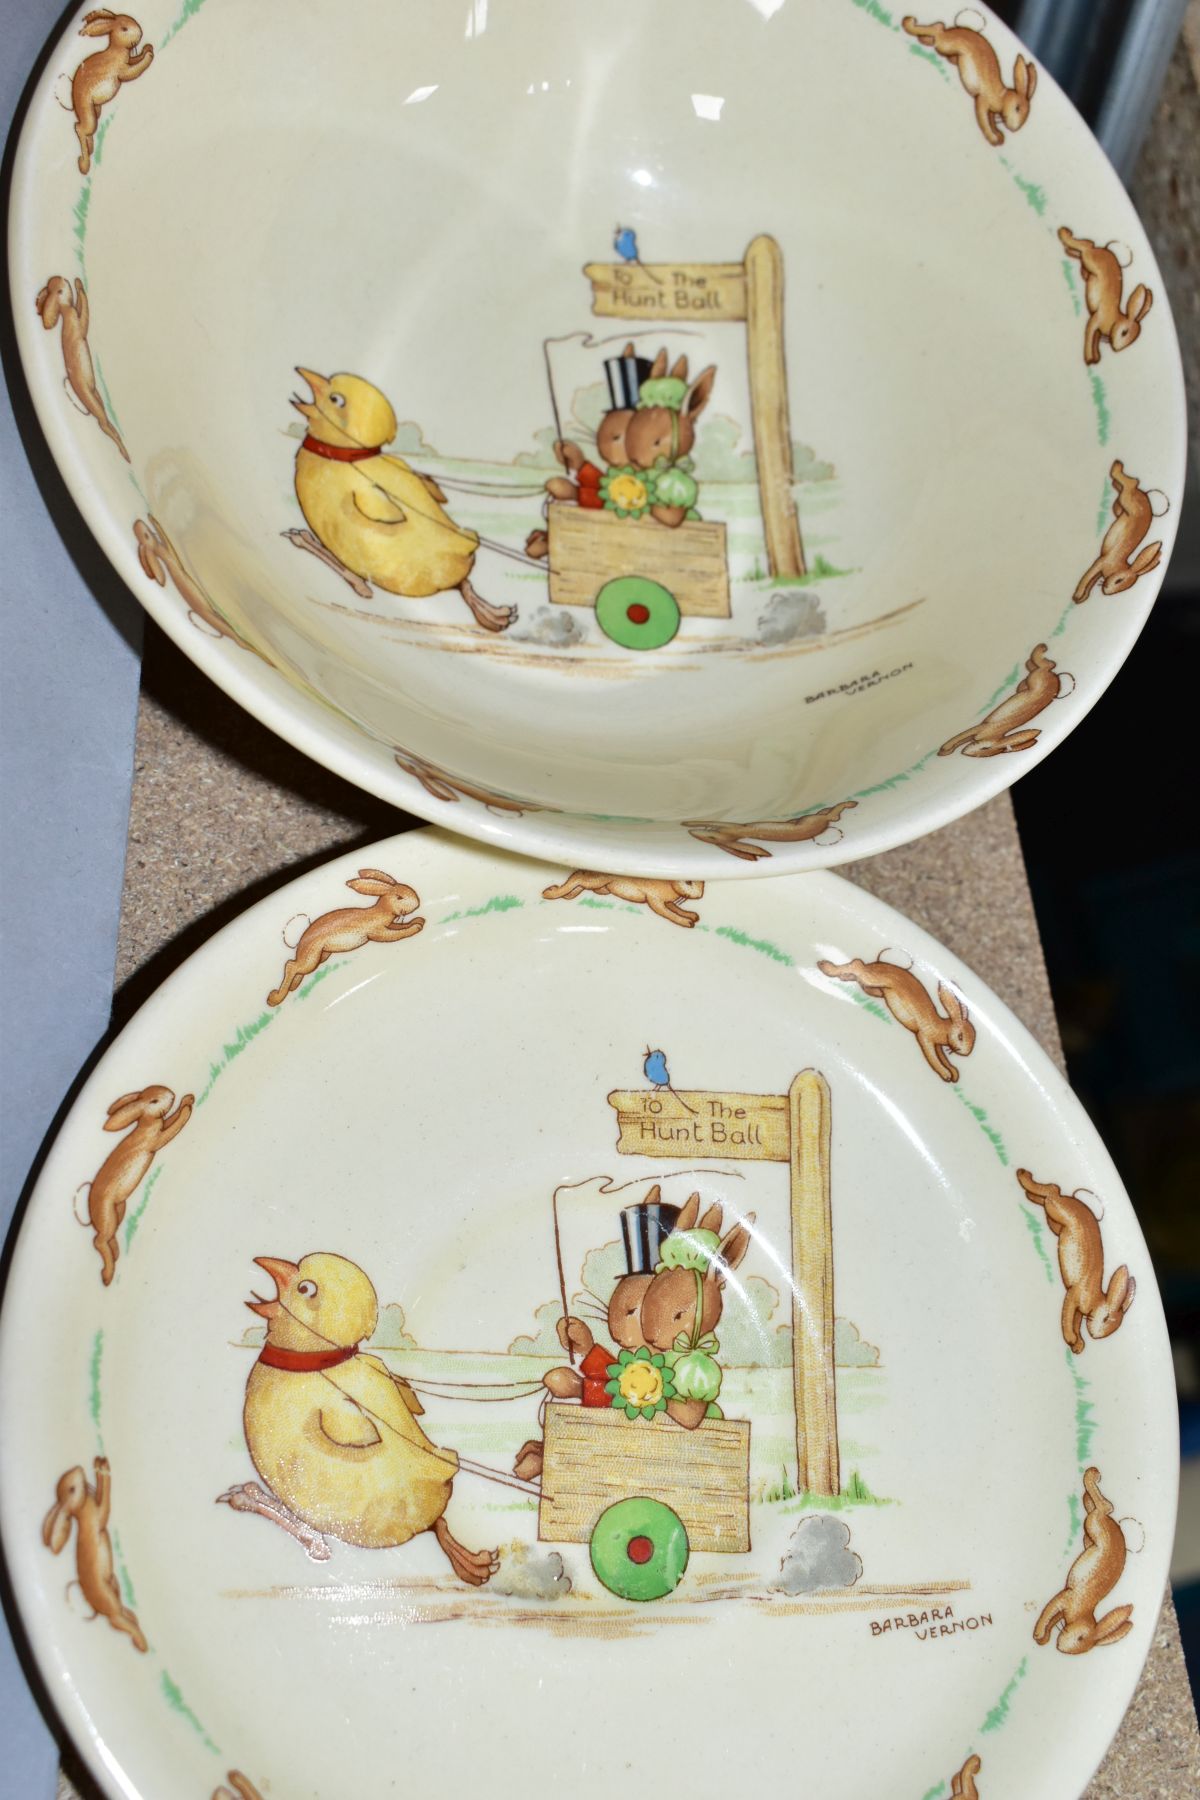 SIX PIECES OF ROYAL DOULTON BUNNYKINS EARTHENWARE TABLES WARES OF CHICKEN PULLING CART, DESIGNED - Image 9 of 10